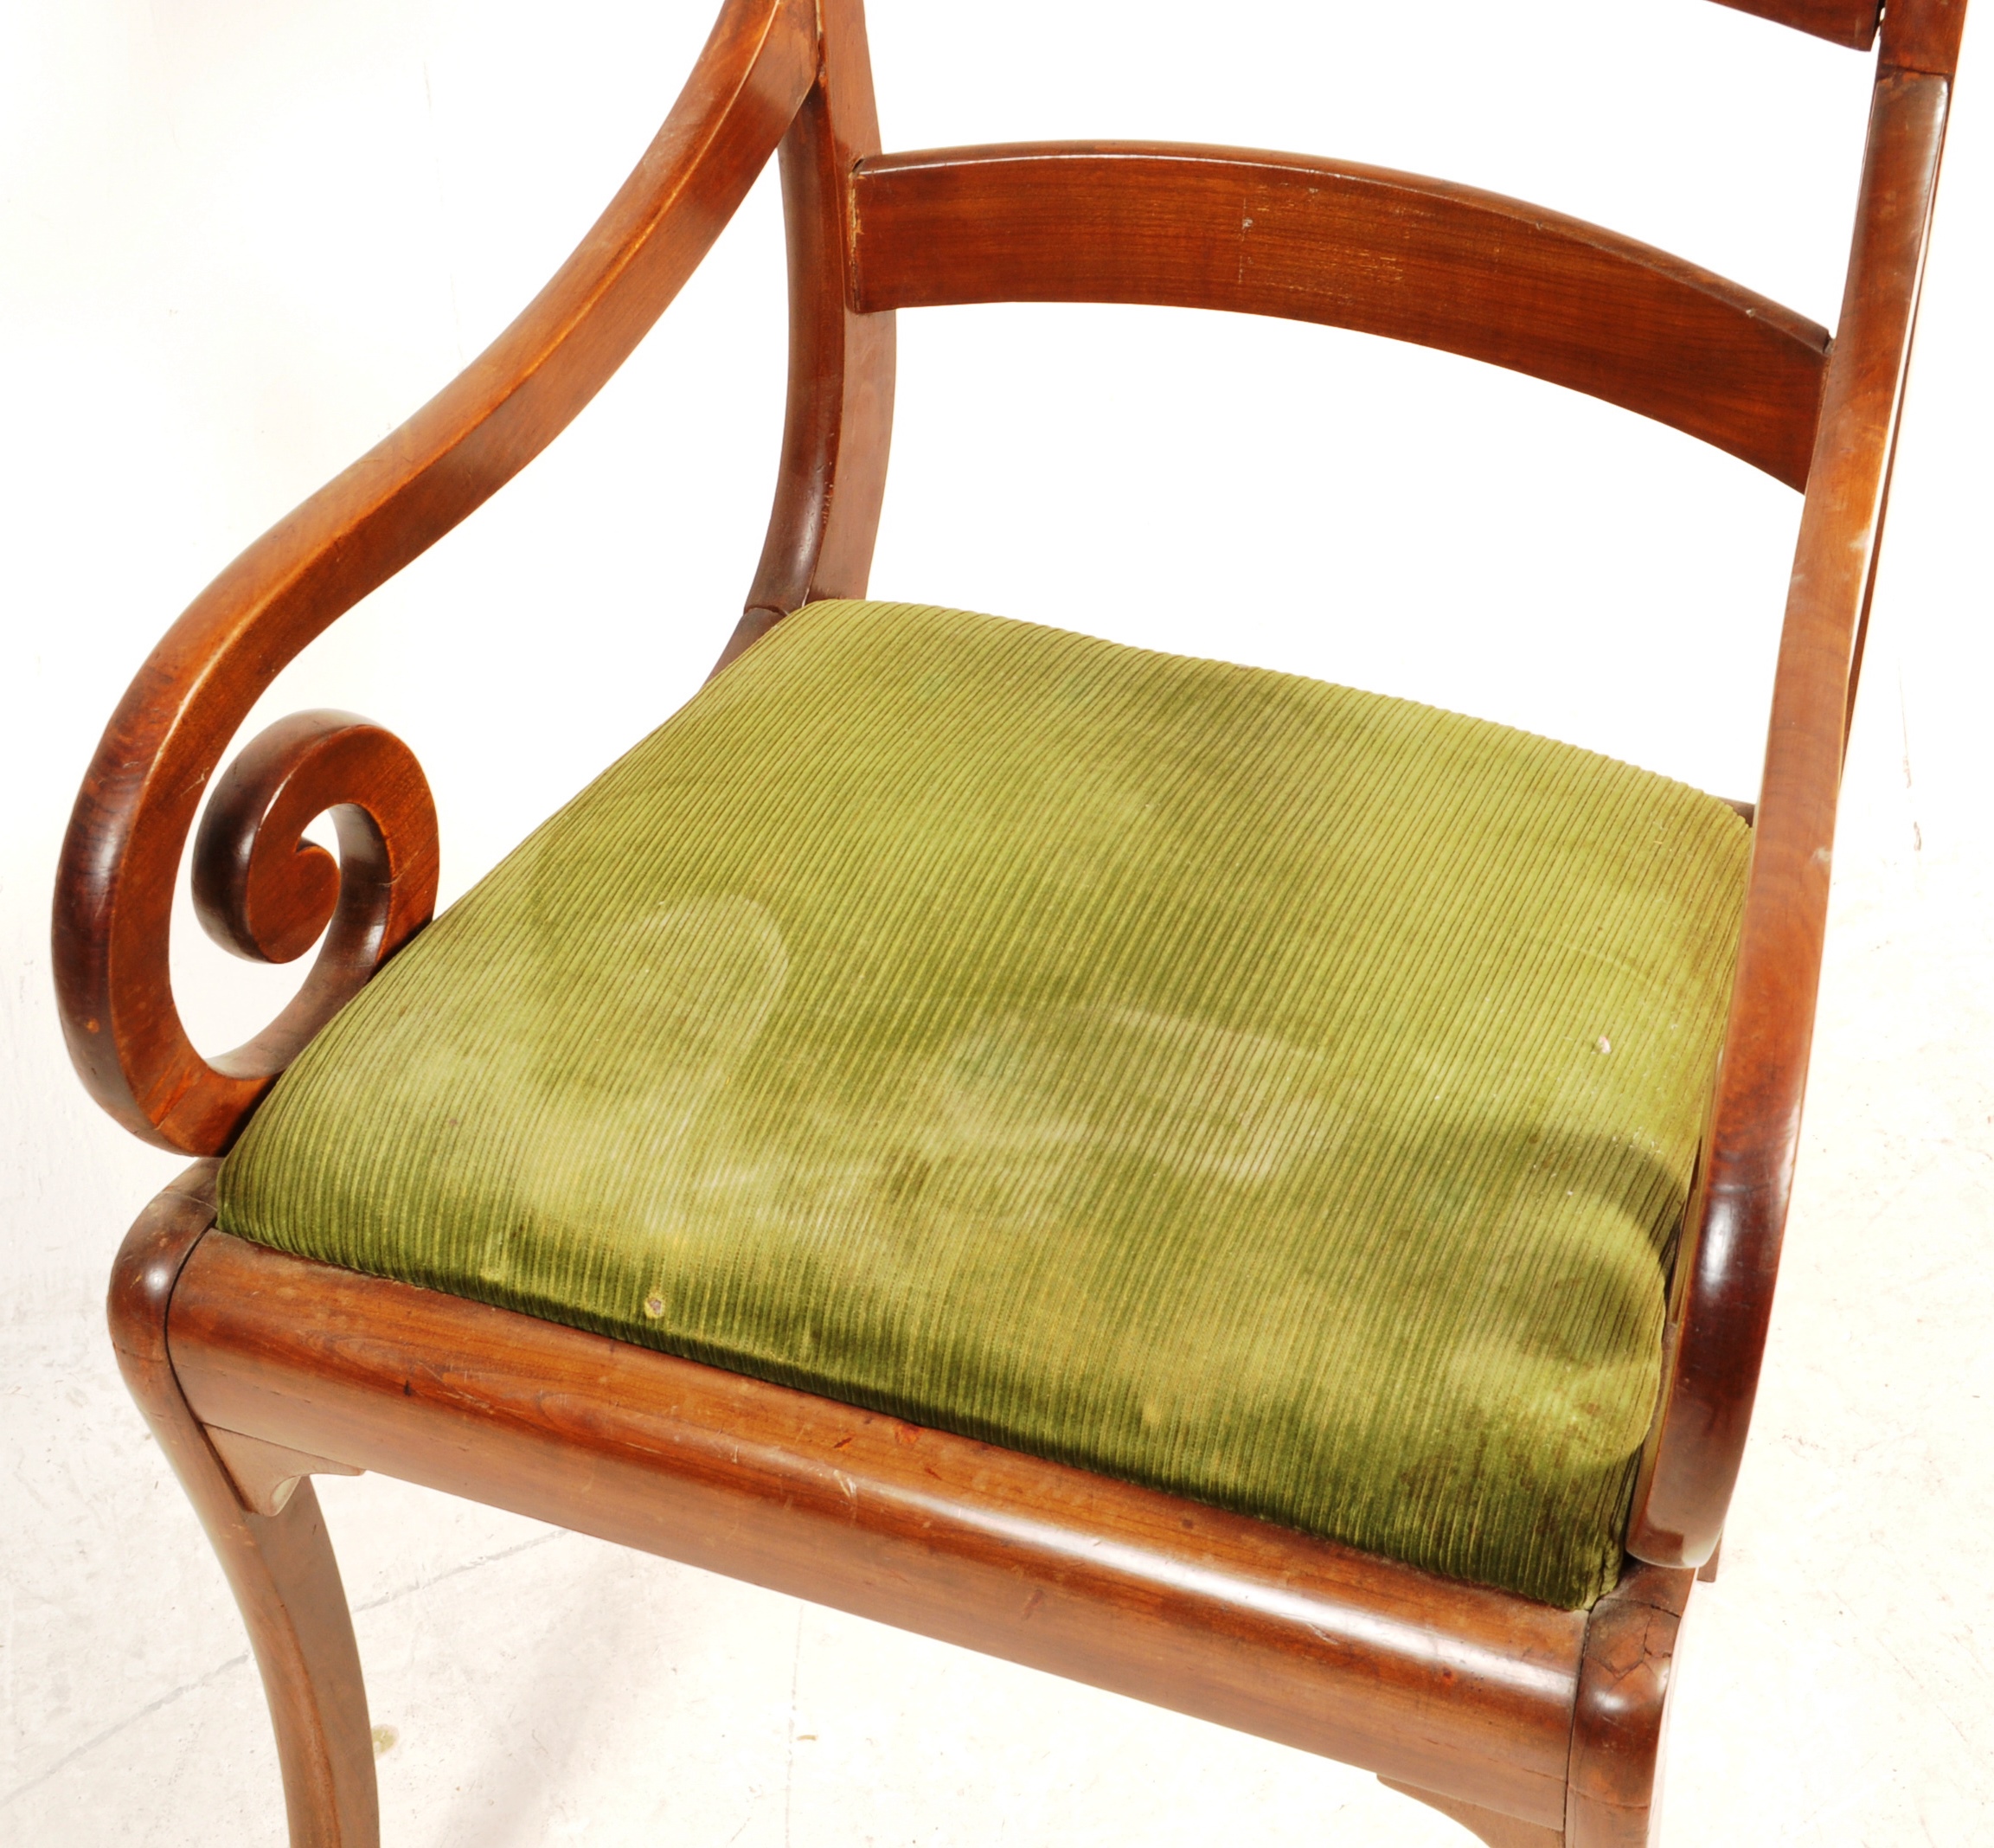 EARLY 19TH CENTURY REGENCY MAHOGANY SCROLLED ARM CHAIR - Image 5 of 8